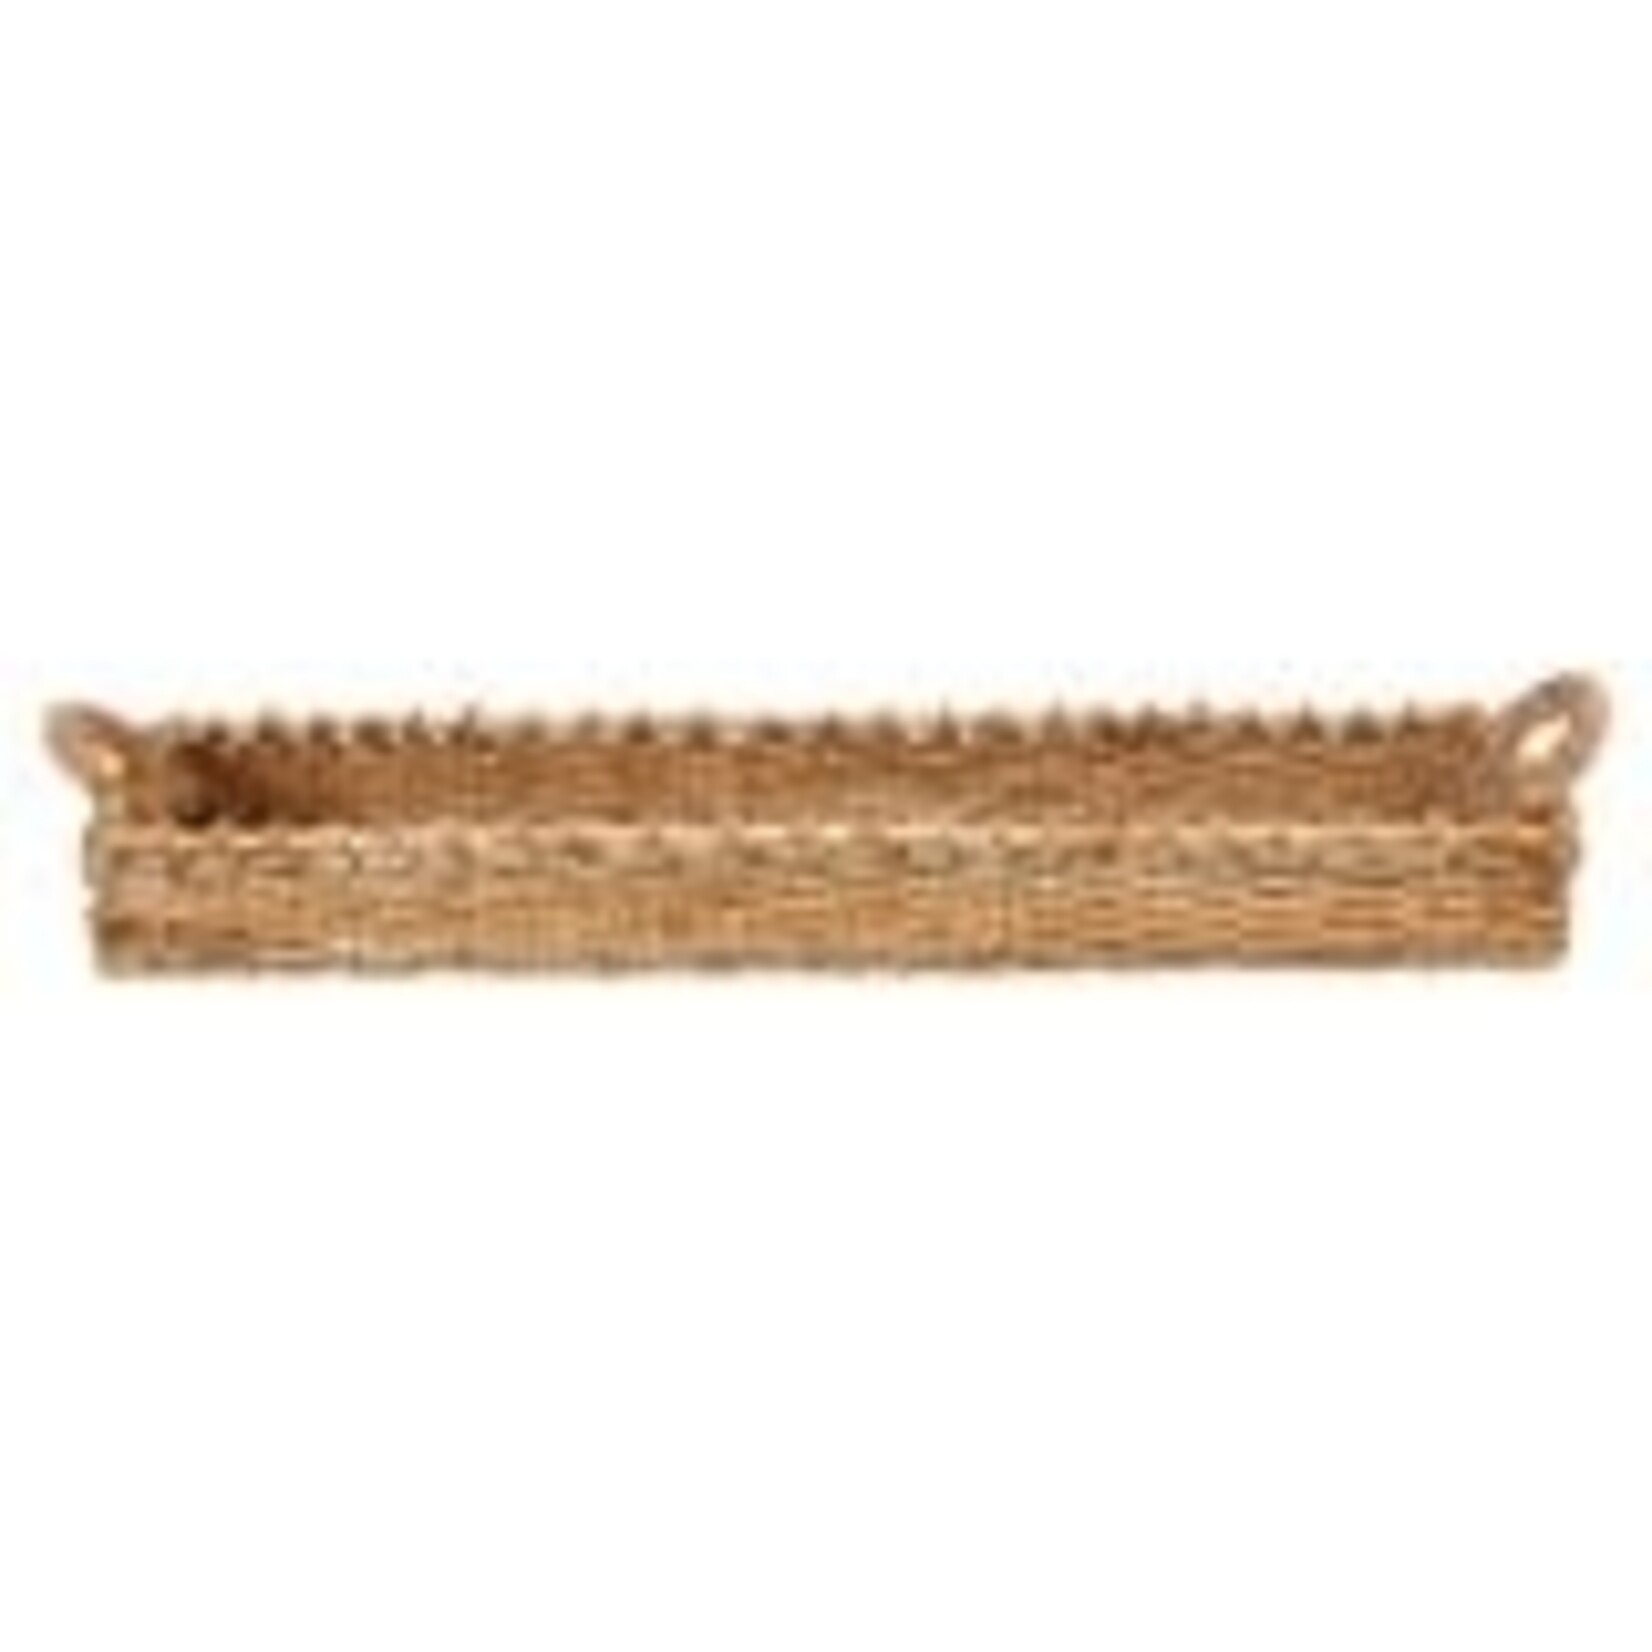 Creative Co-Op Decorative Hand-Woven Seagrass Tray wHandles